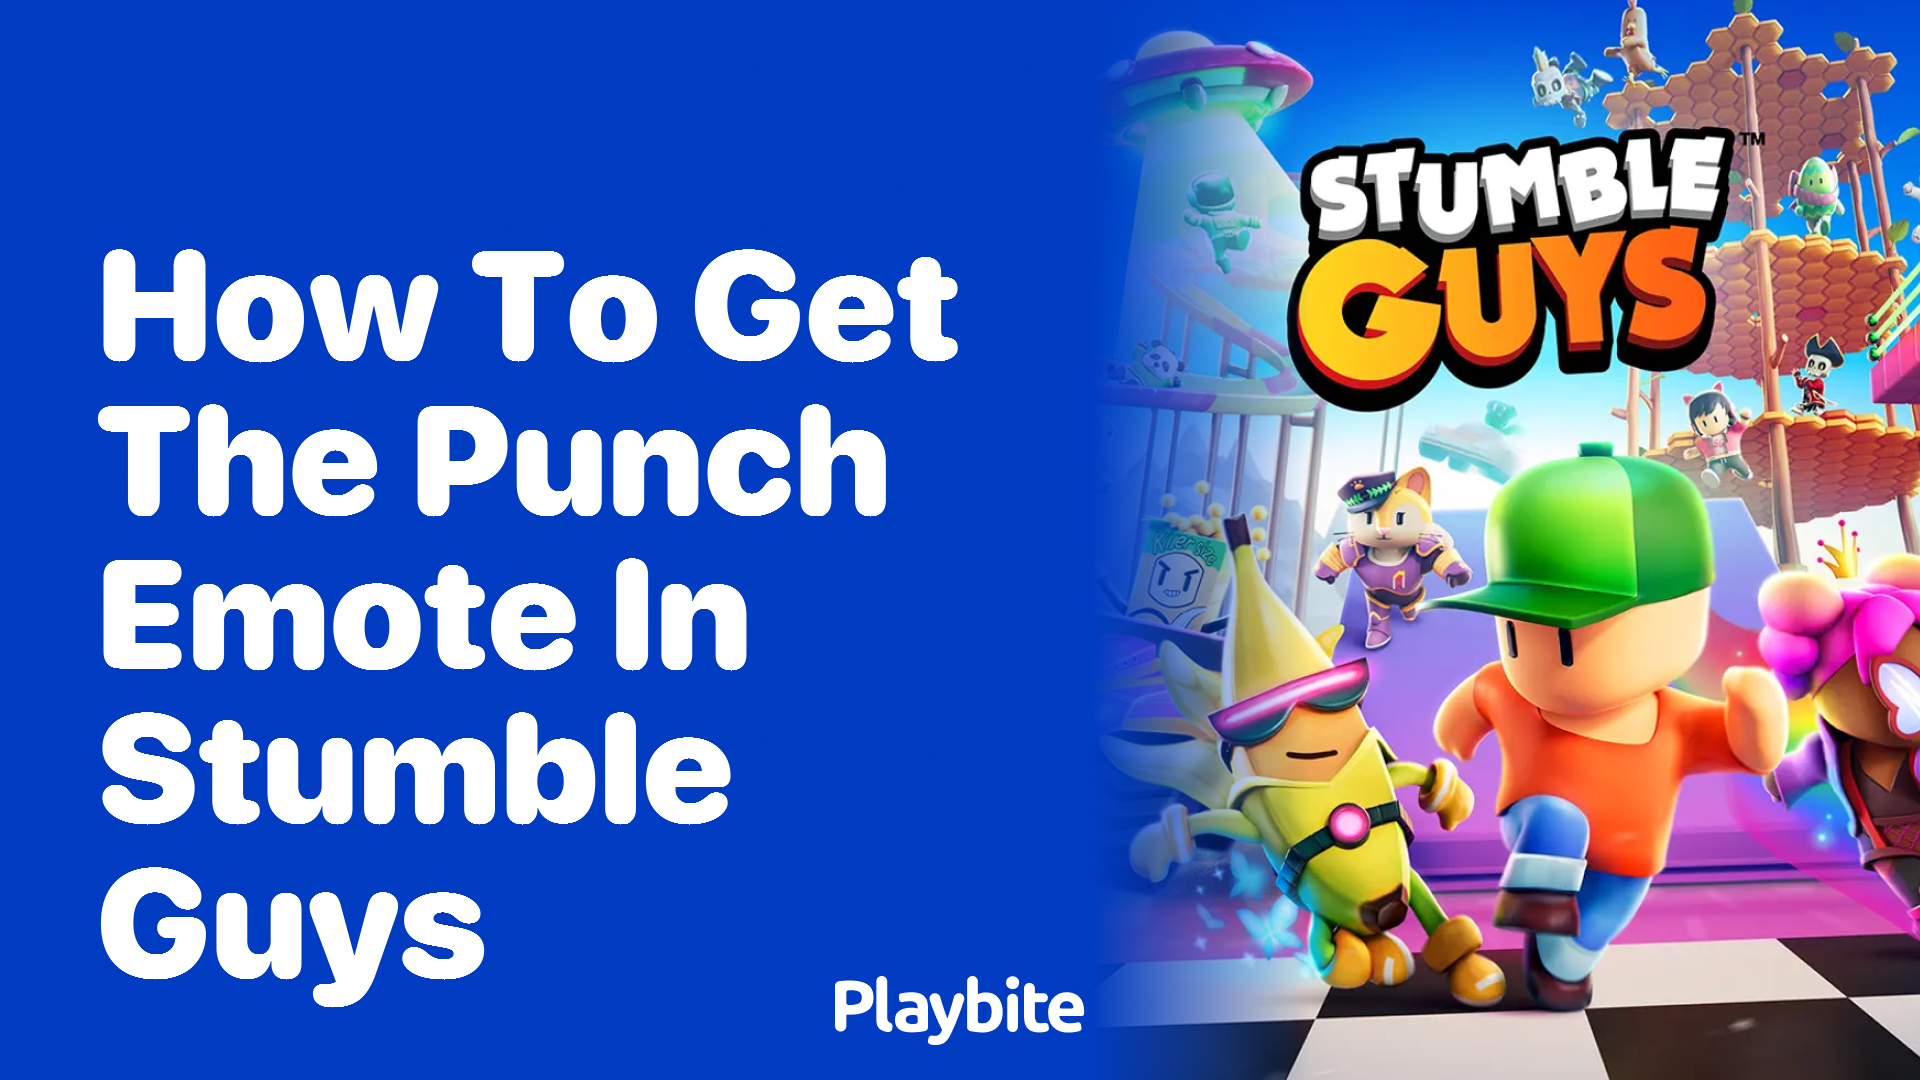 How to Get the Punch Emote in Stumble Guys